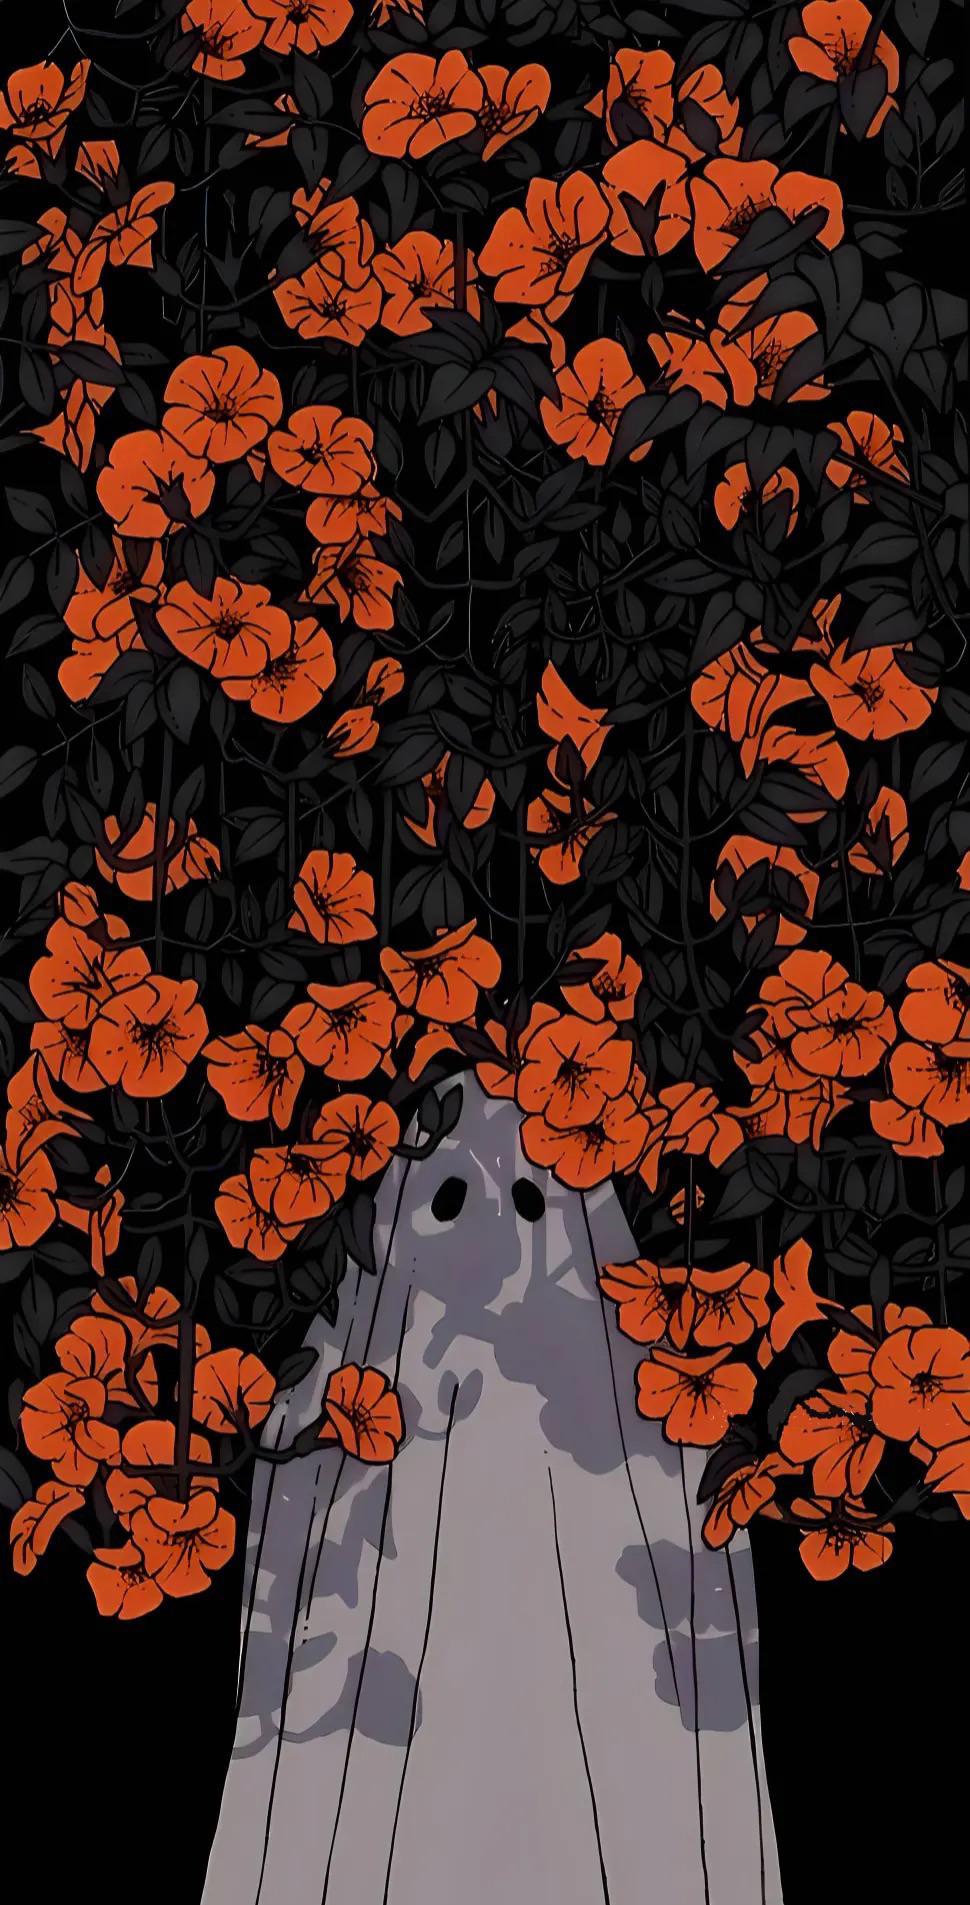 A tree with orange flowers and black background - Spooky